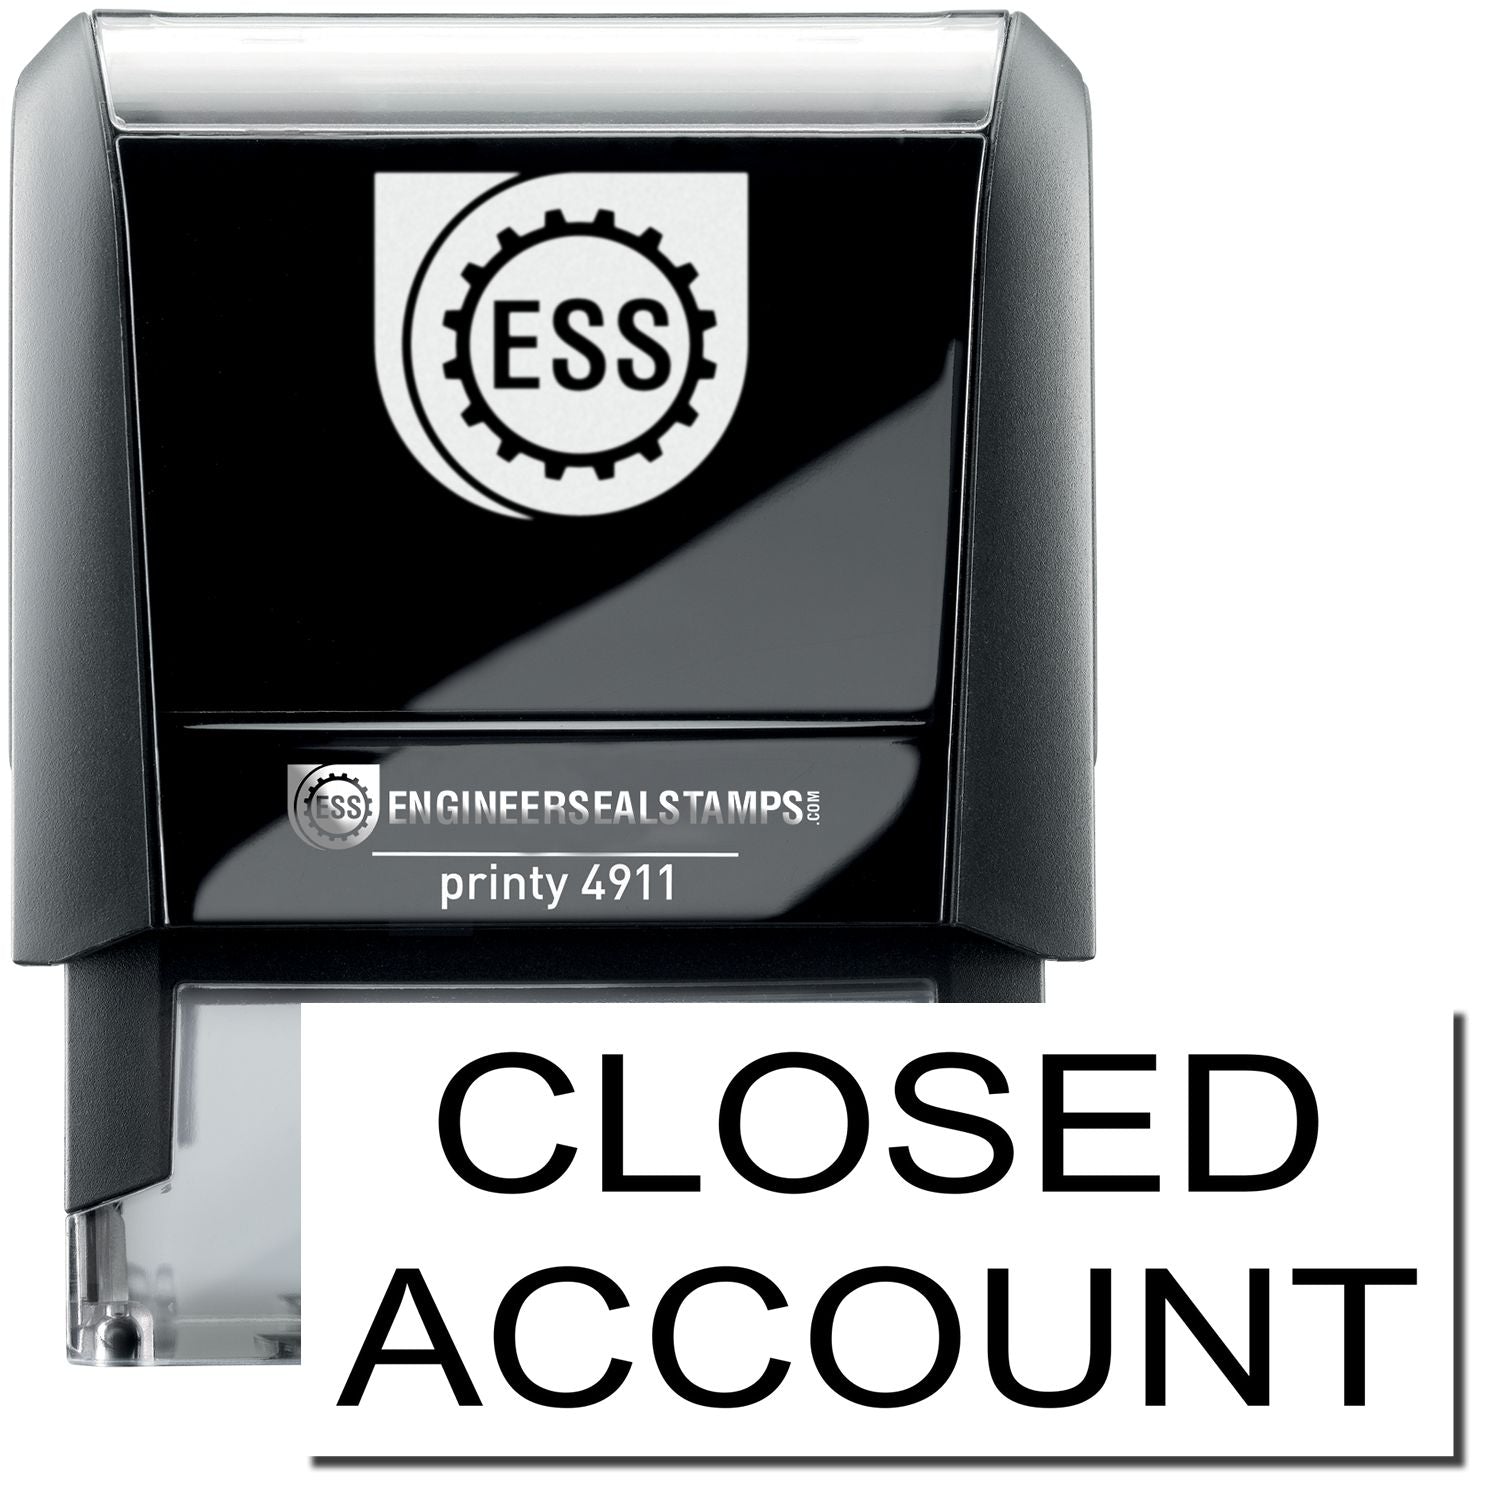 A self-inking stamp with a stamped image showing how the text "CLOSED ACCOUNT" is displayed after stamping.